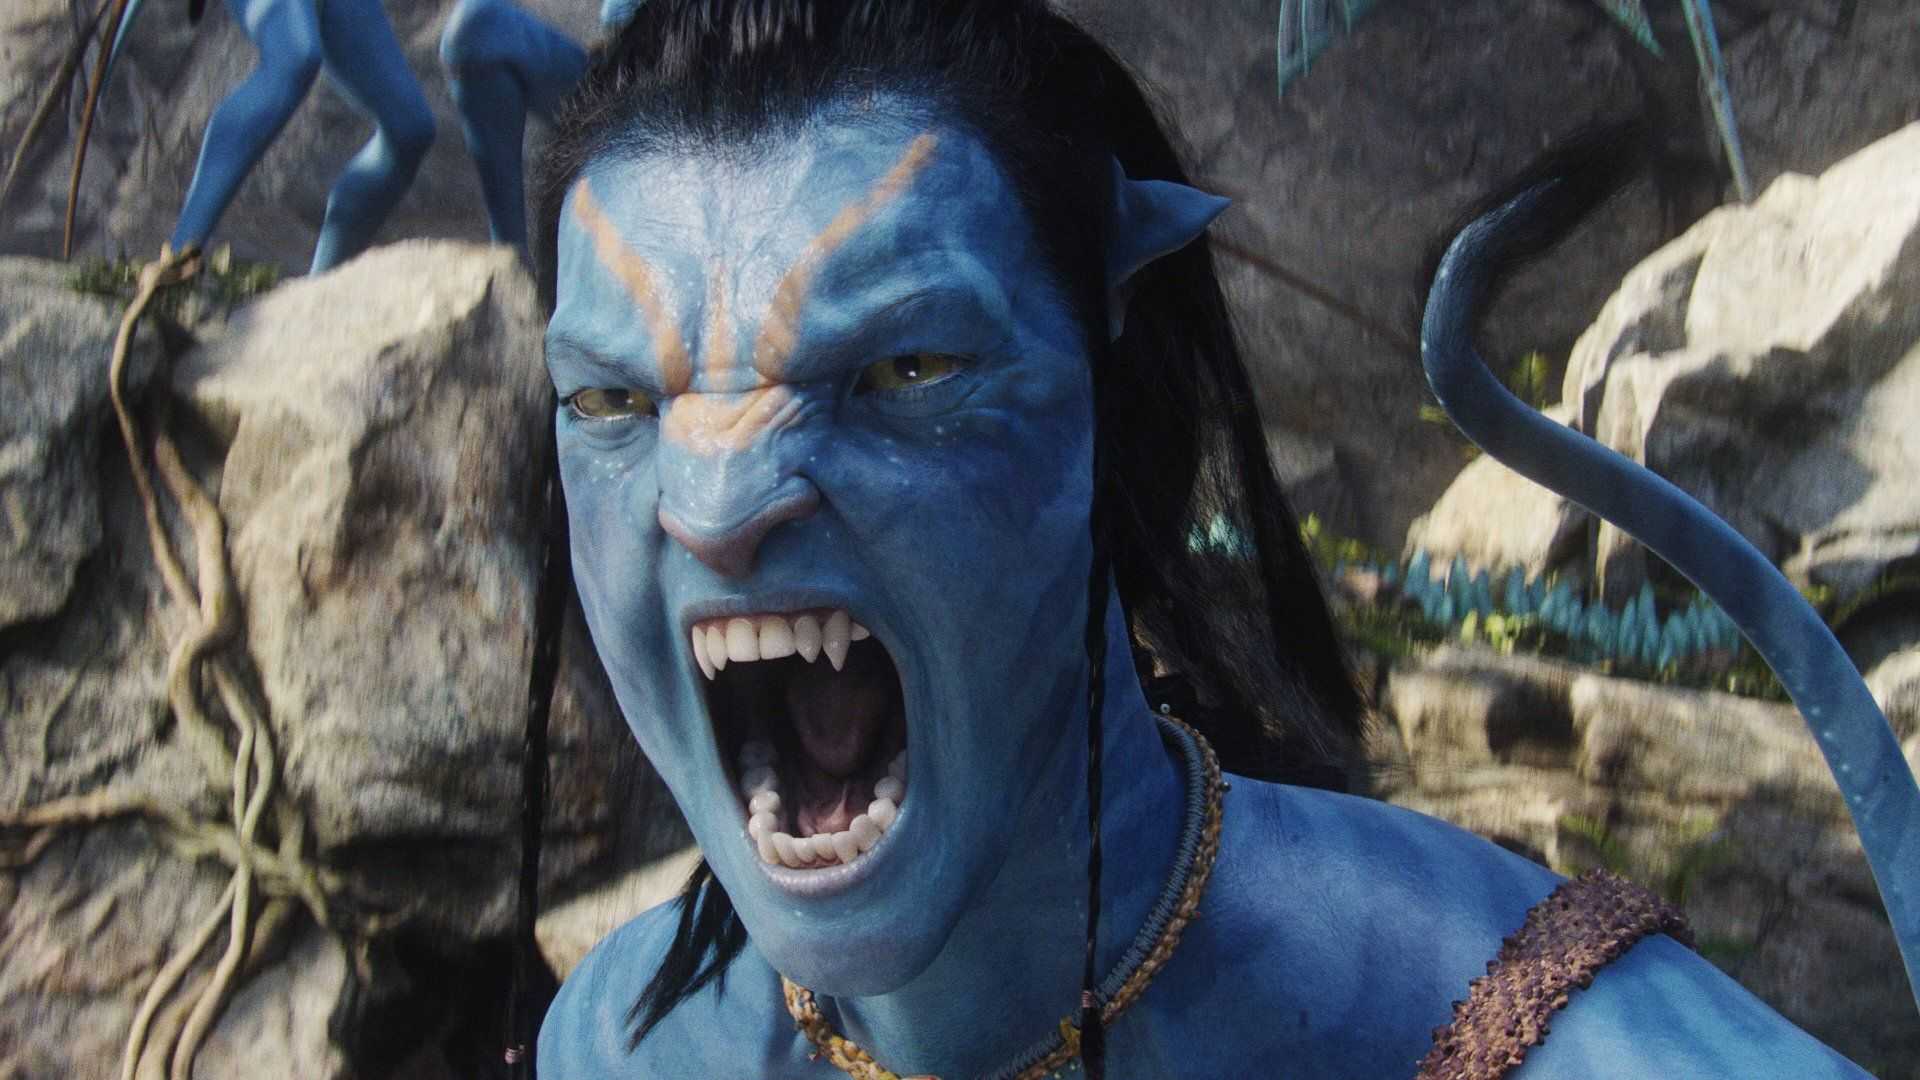 Avatar: The Way of Water is making waves at the Indian box office even before its release by beating Doctor Strange 2's pre-booking record